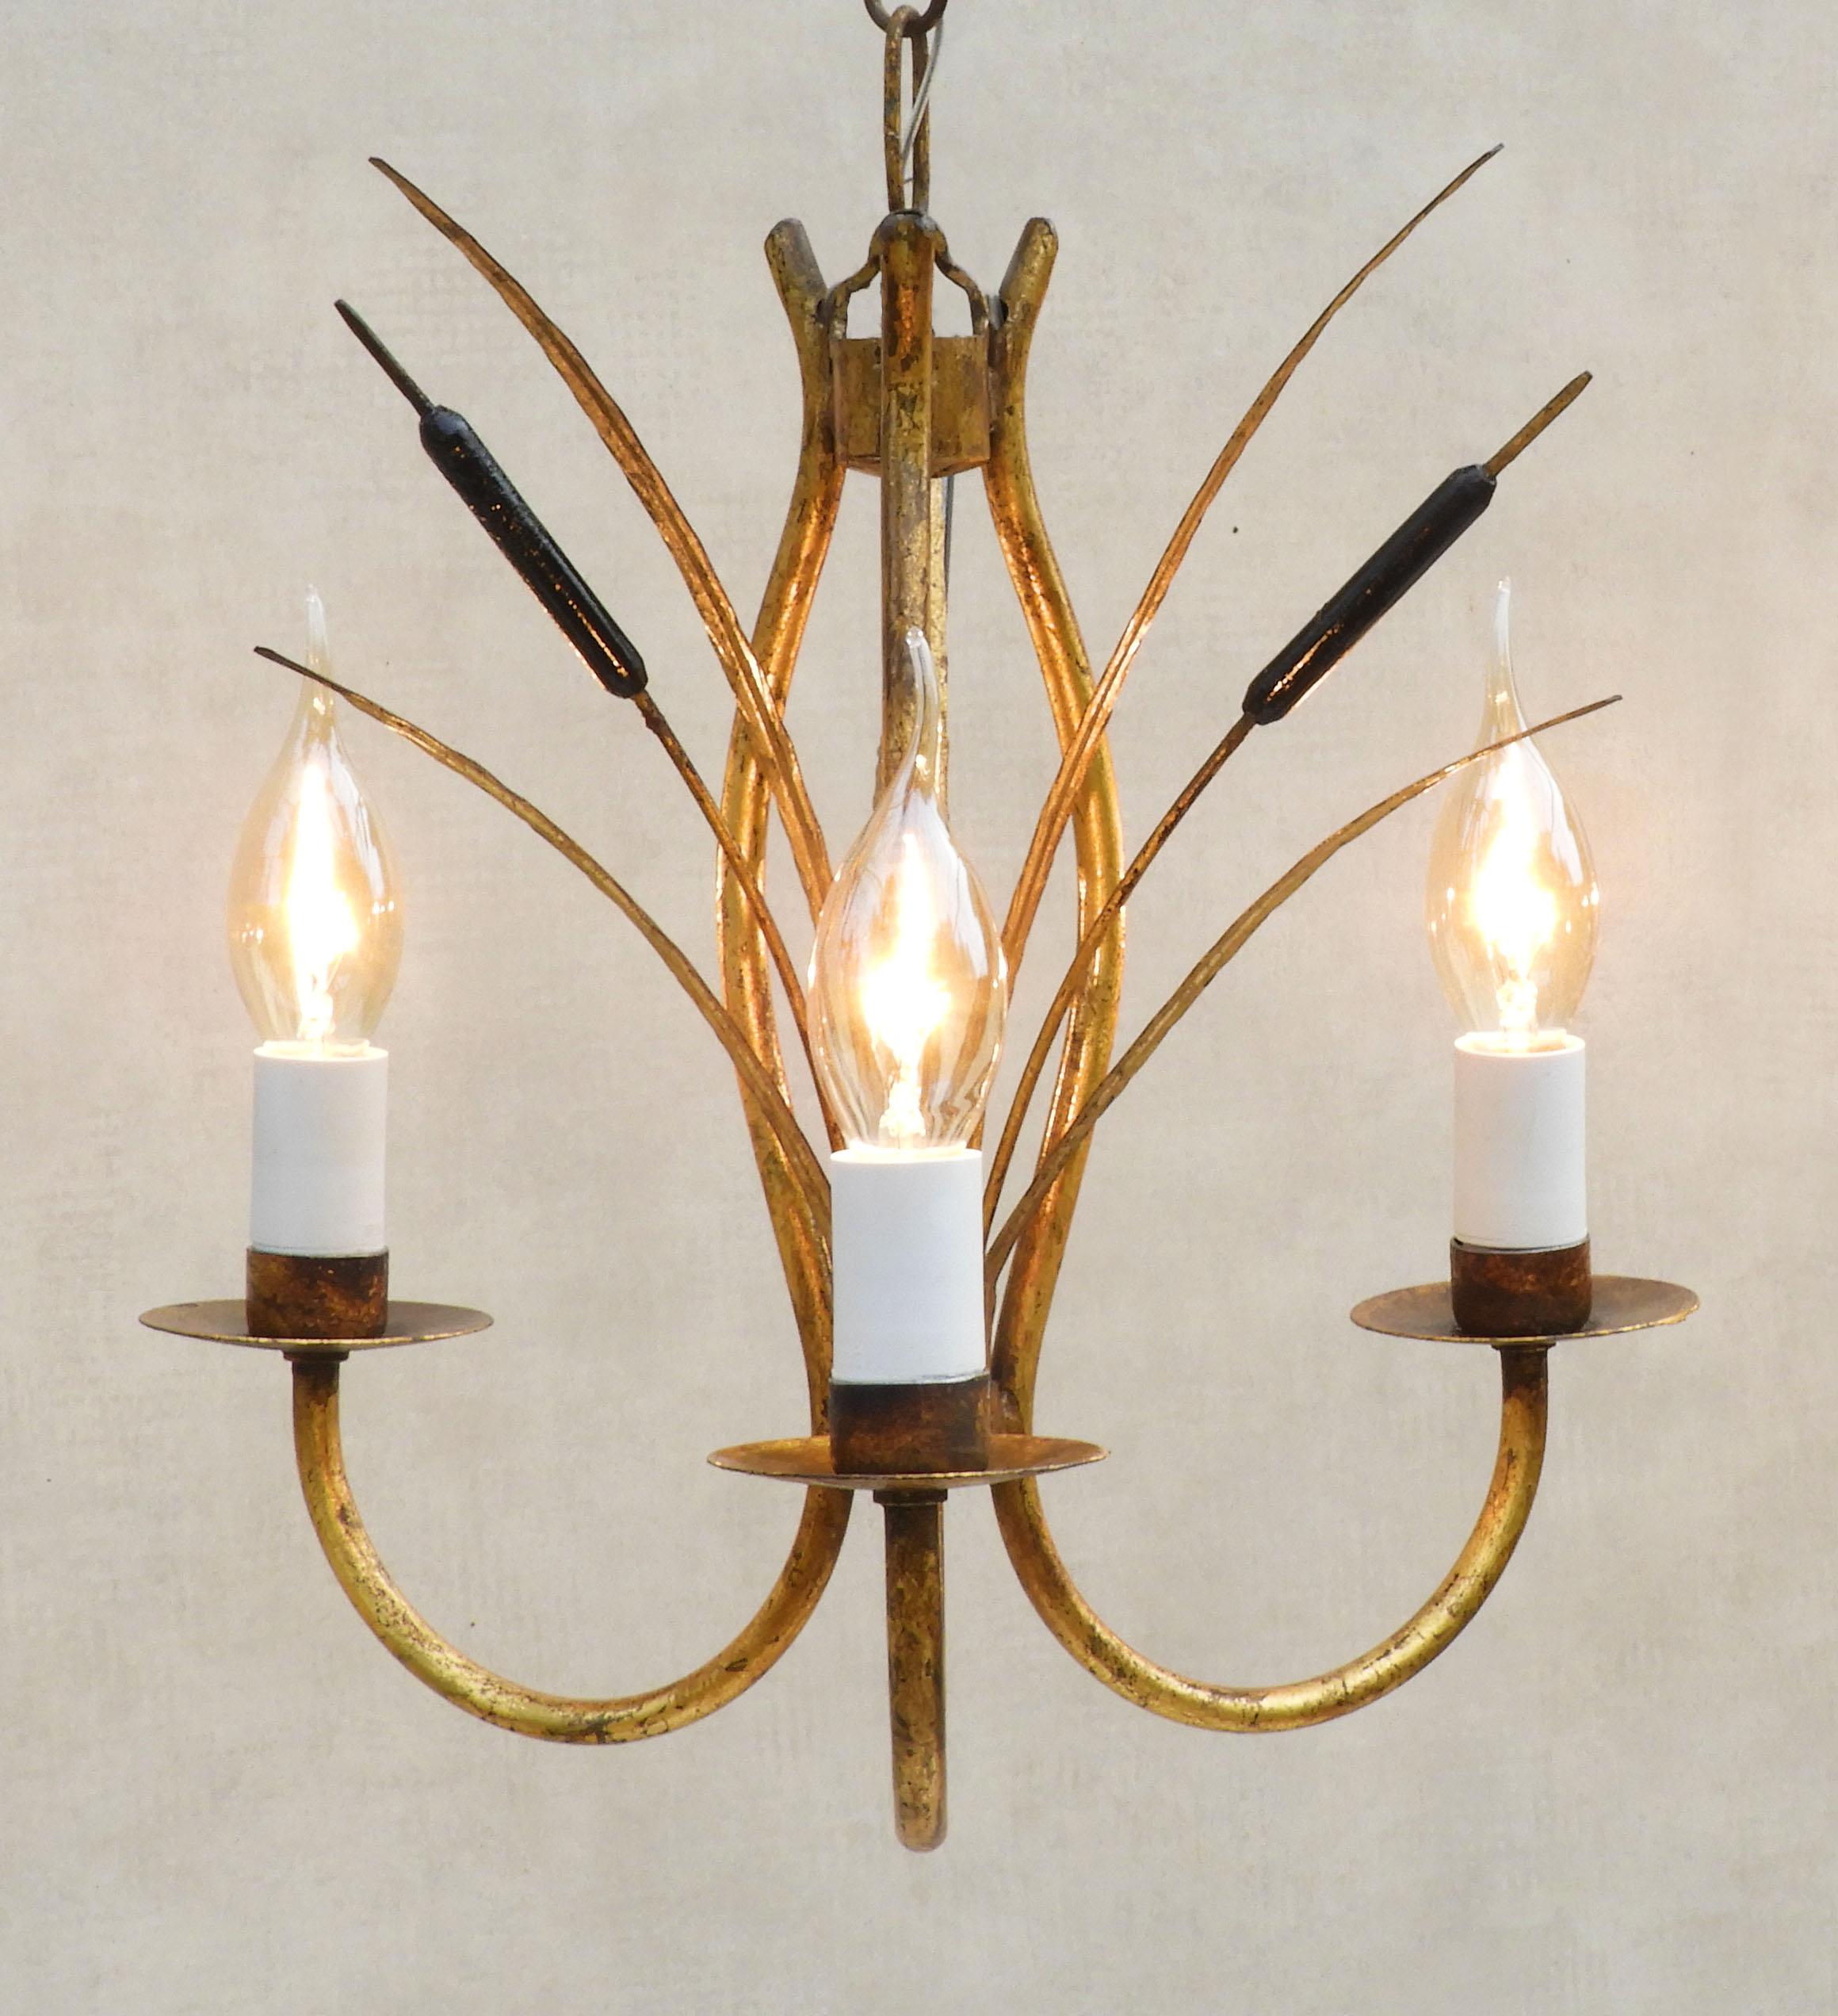 Pair of Bulrush Gilded Tôle Pendant Light Chandeliers C1960s France In Good Condition For Sale In Trensacq, FR